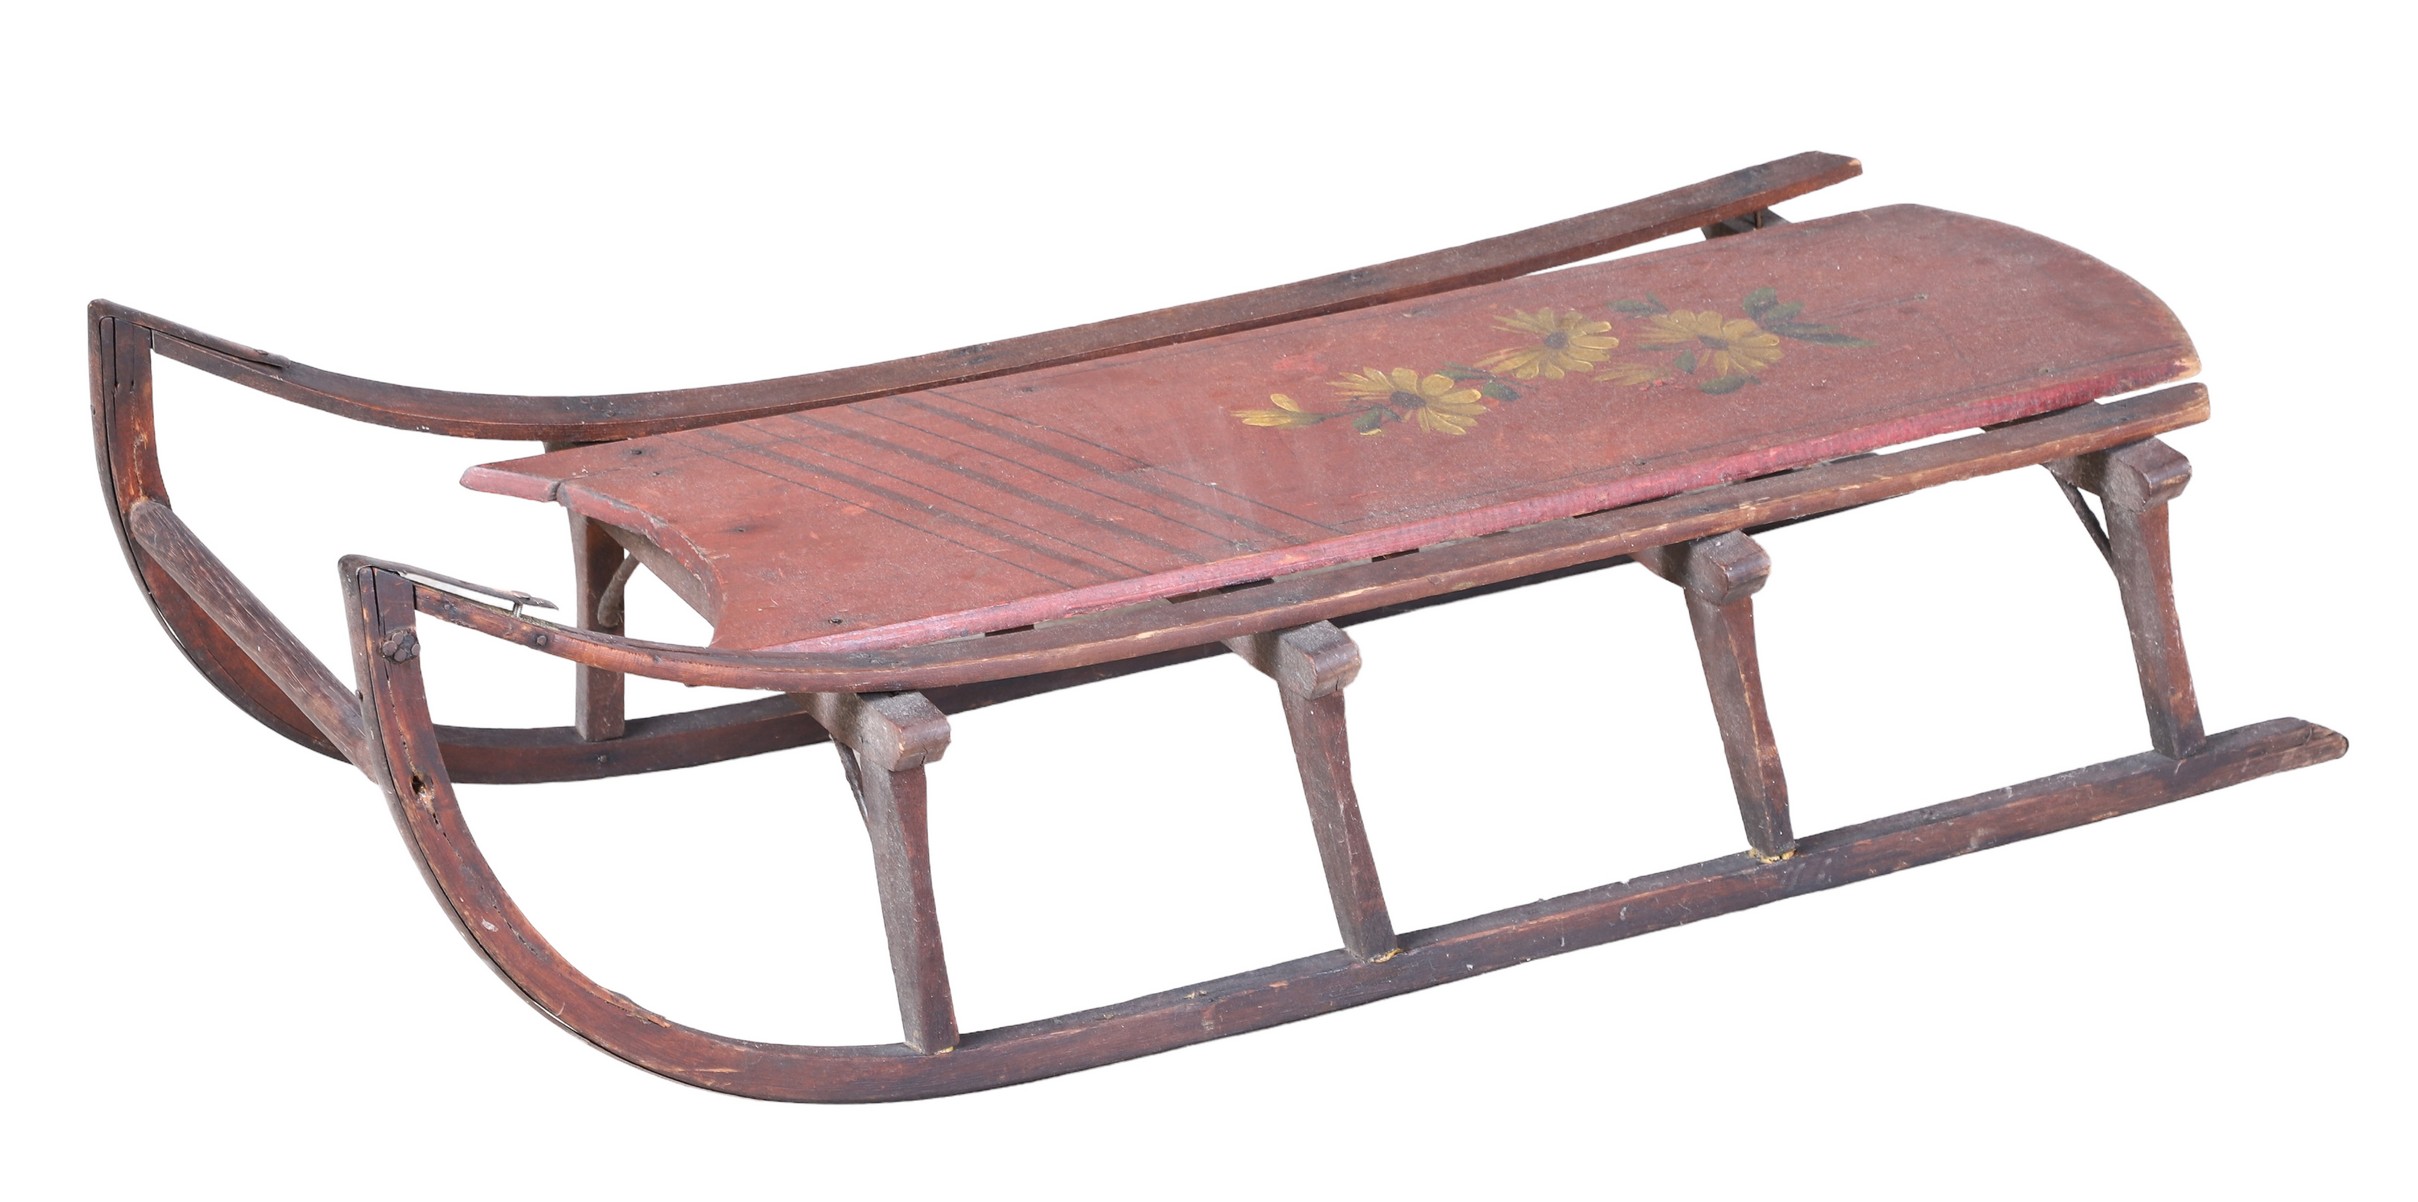 Painted wood childs sleigh with 2e0d85